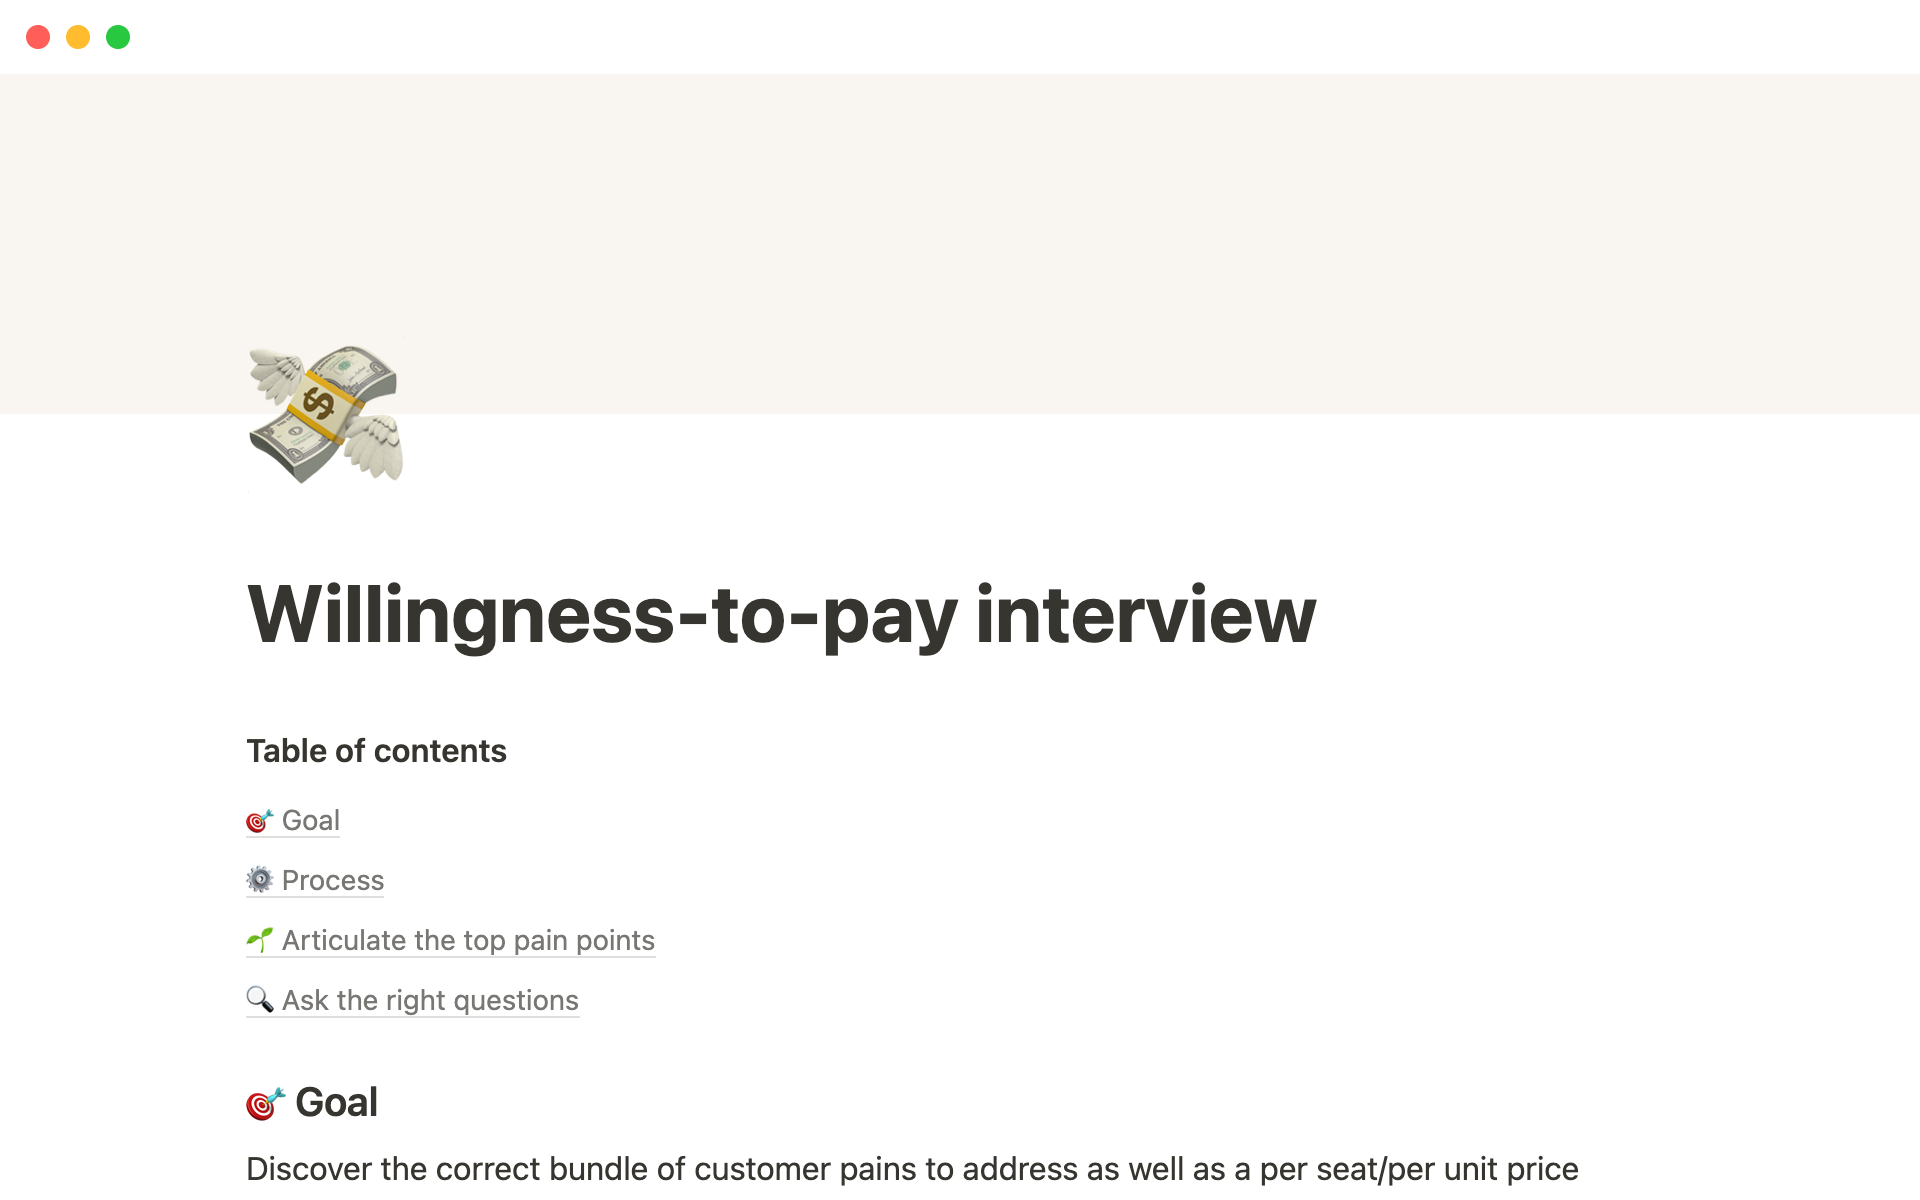 The desktop image for the Merci Grace's willingness-to-pay interview template